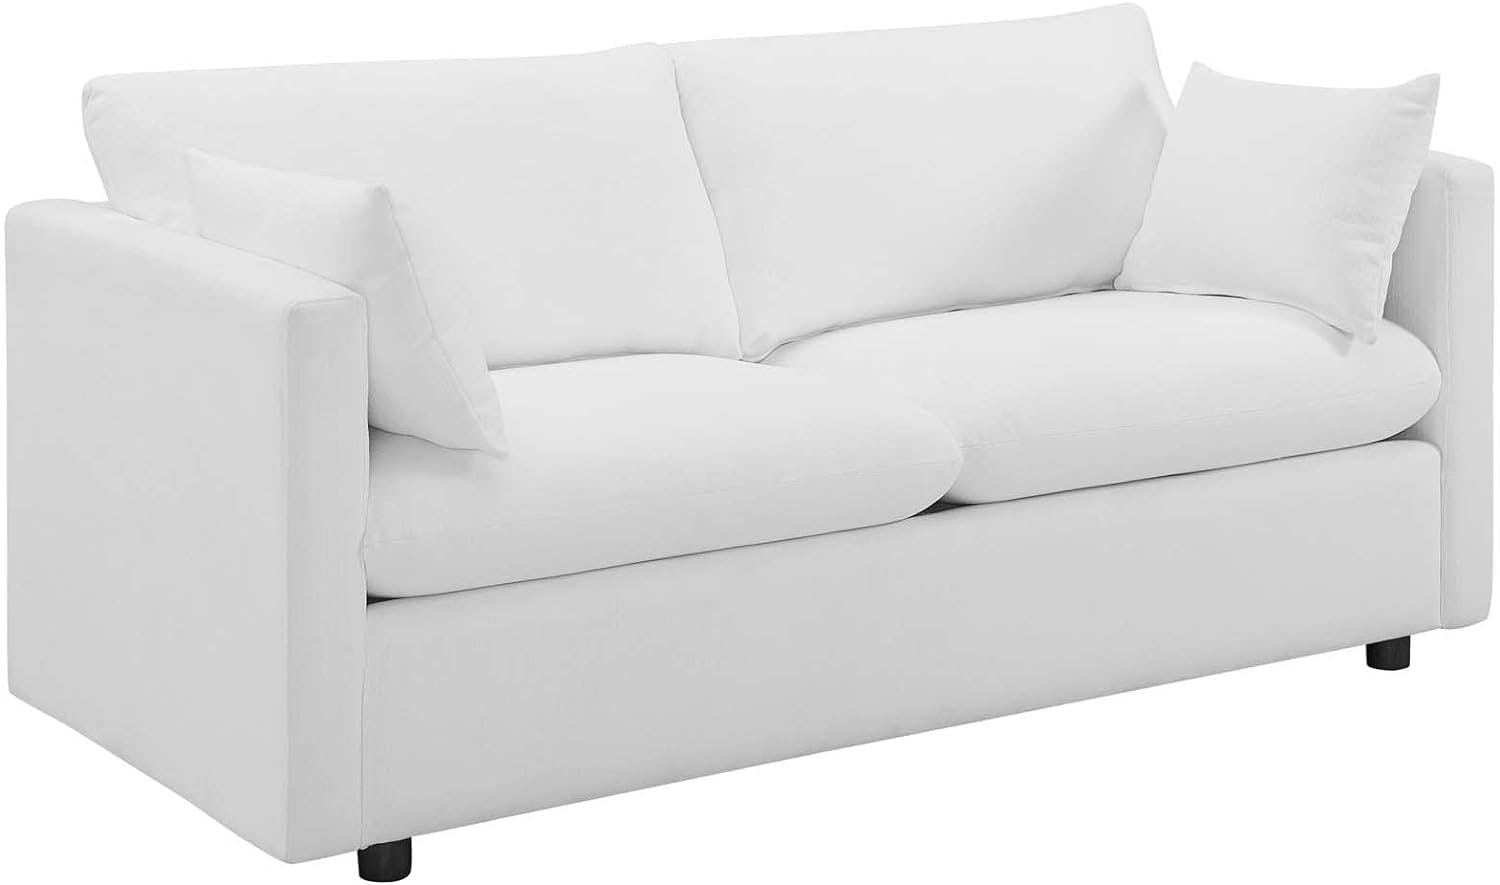 Sublime Comfort White Polyester 70" Tuxedo Sofa with Wood Accents